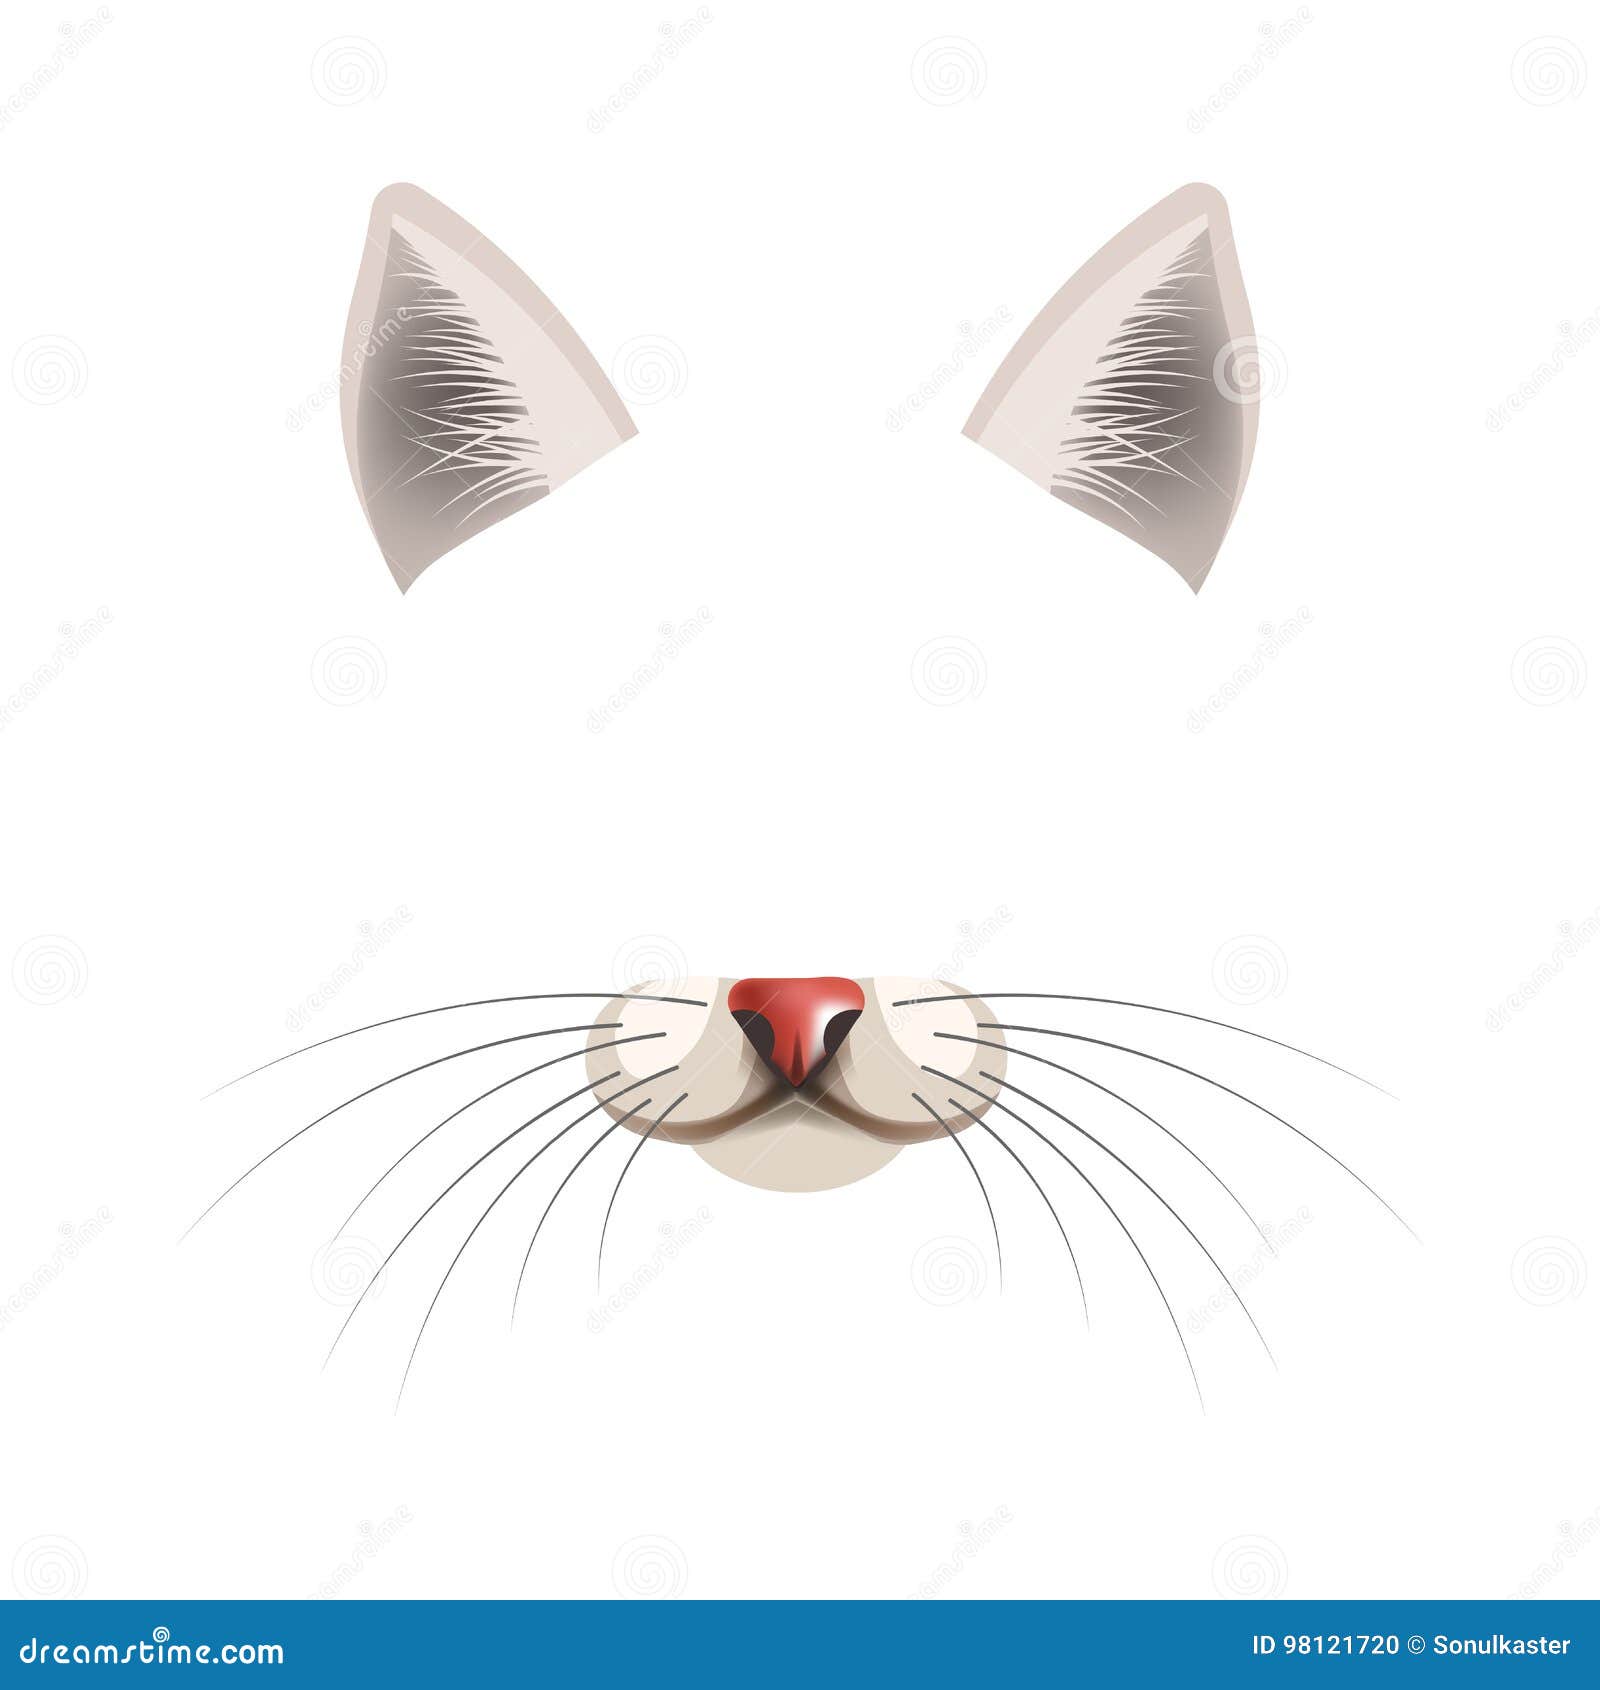 Make animated photo gif online chat filter mask Vector Image